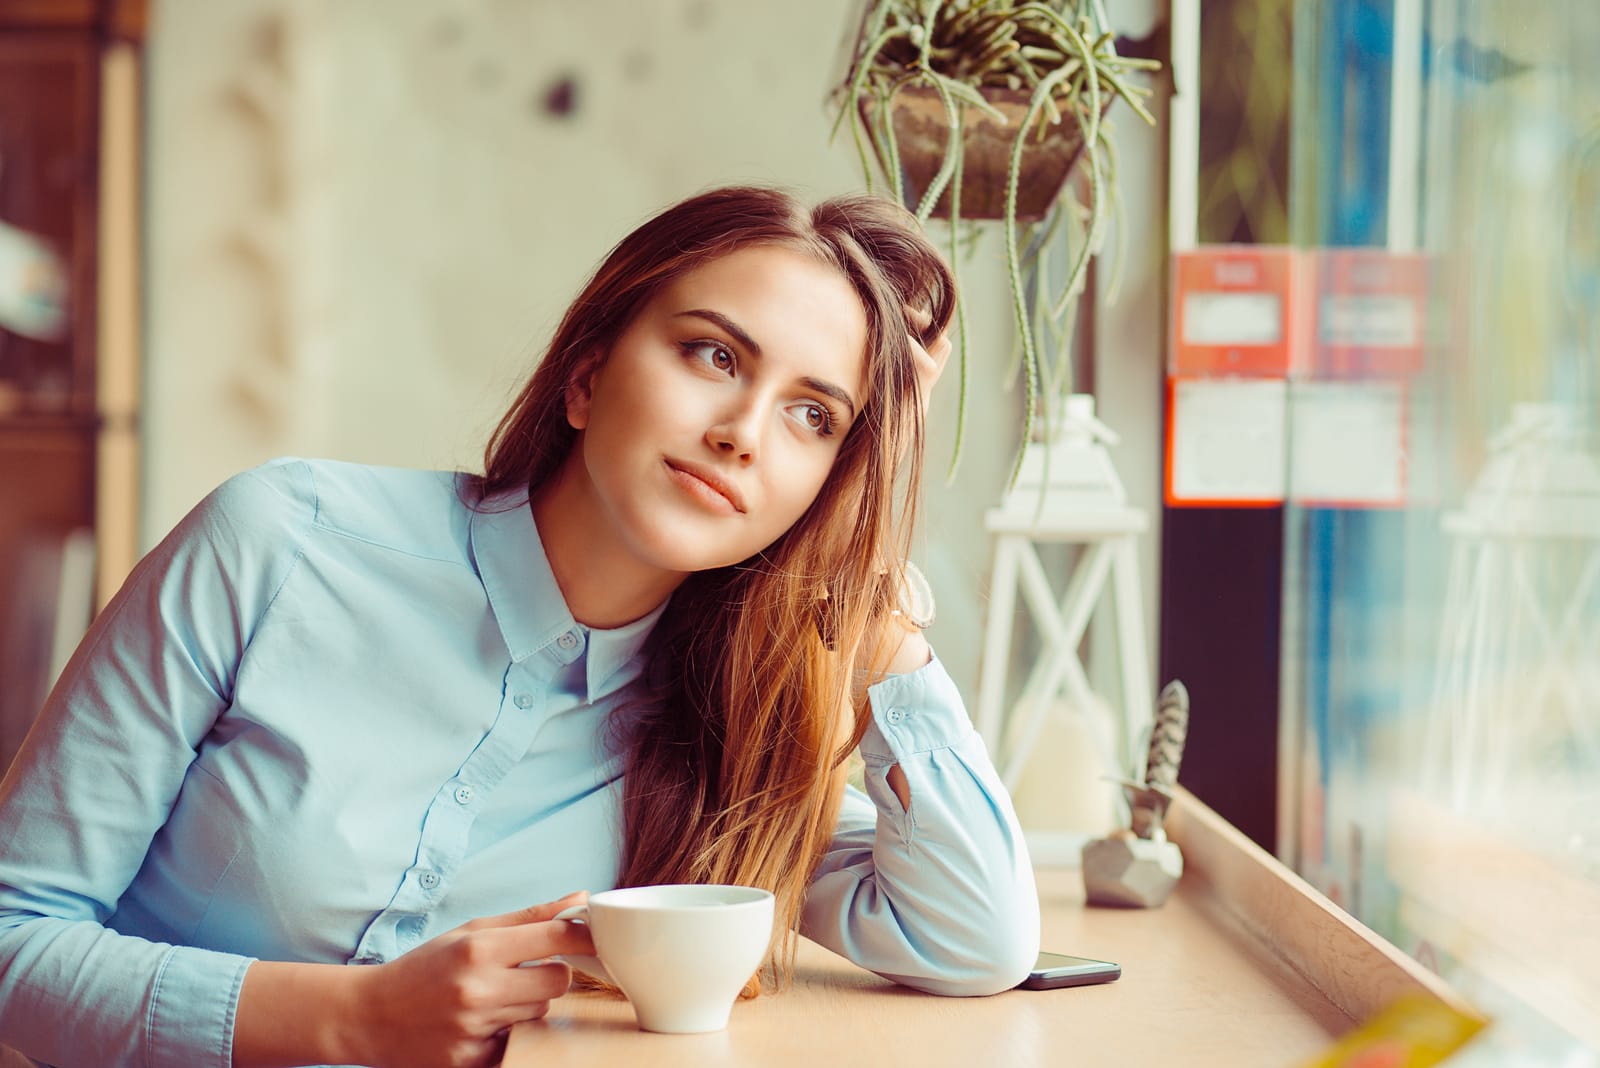 young smiling woman daydreaming at cafe